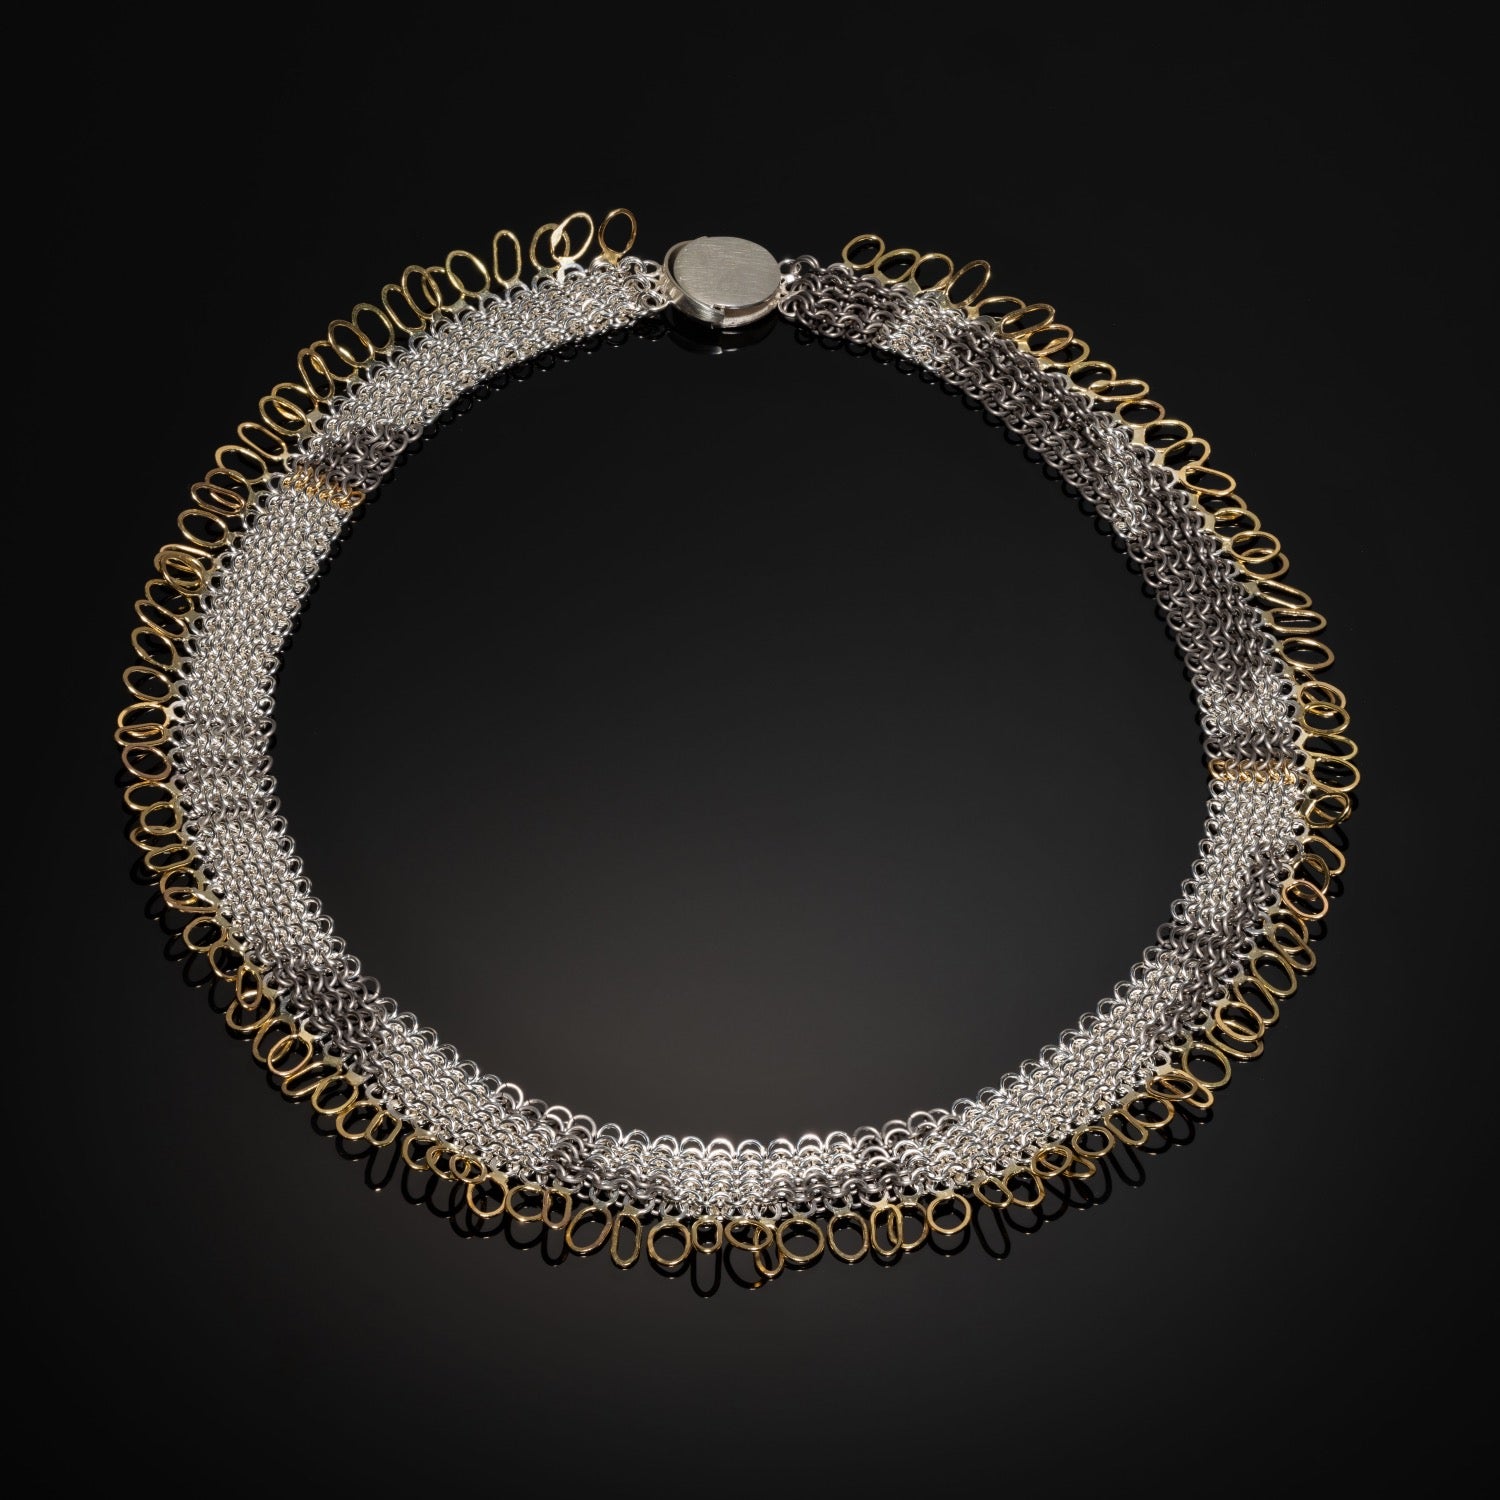 Wild Grasses Collection, handcrafted chainmail in recycled silver, 18ct yellow gold and titanium by Corrinne Eira evans chainmail necklace